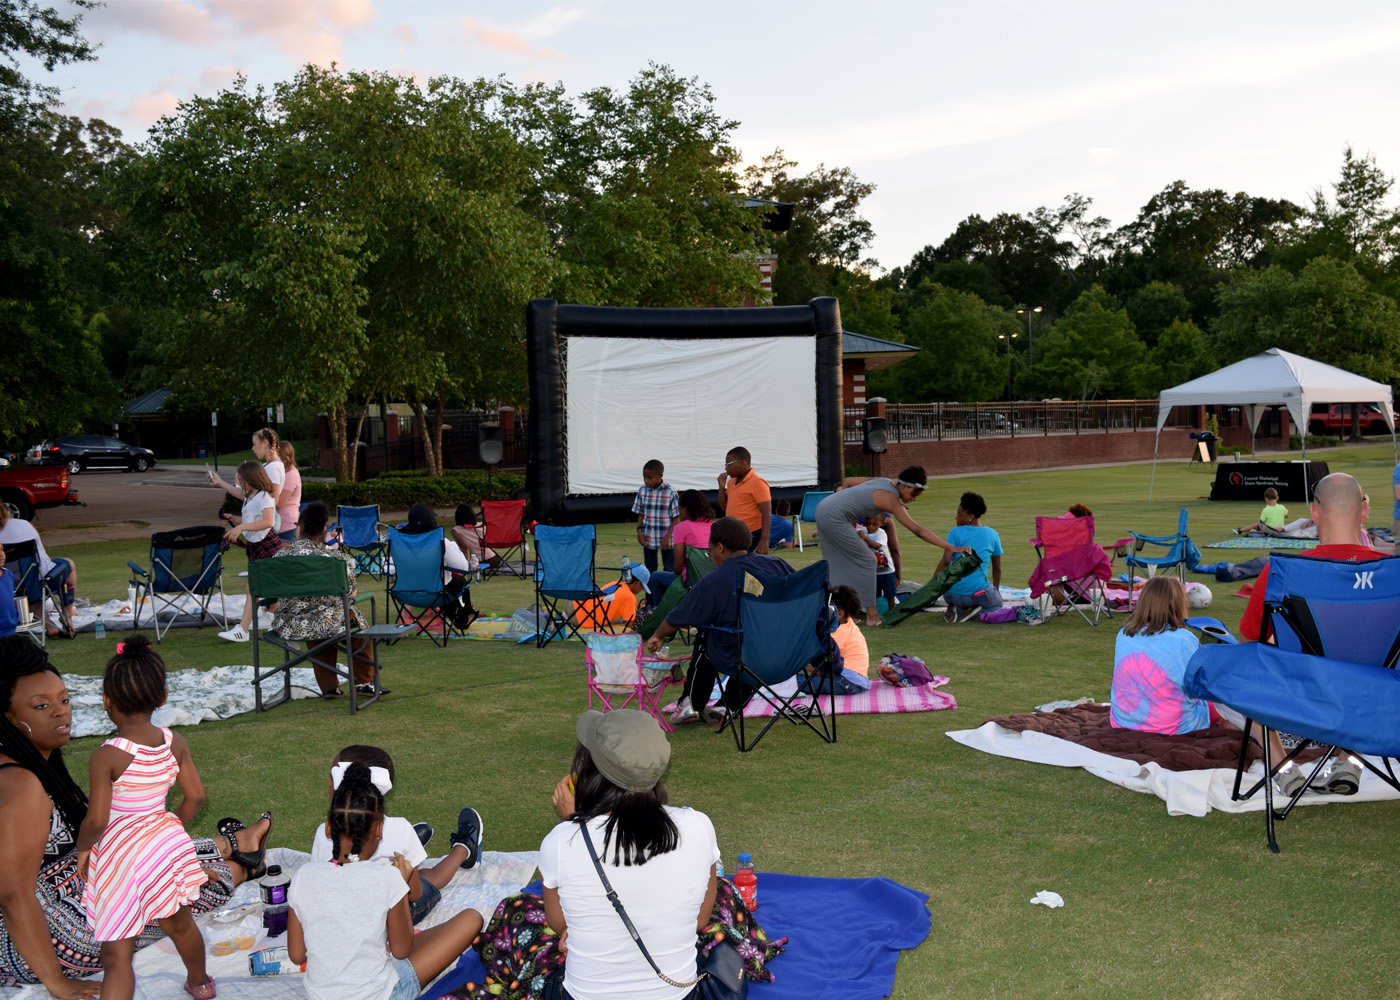 Many families sit with their backs to the camera on the ground and in folding chairs and blankets outdoors and face a large movie screen in a park setting.